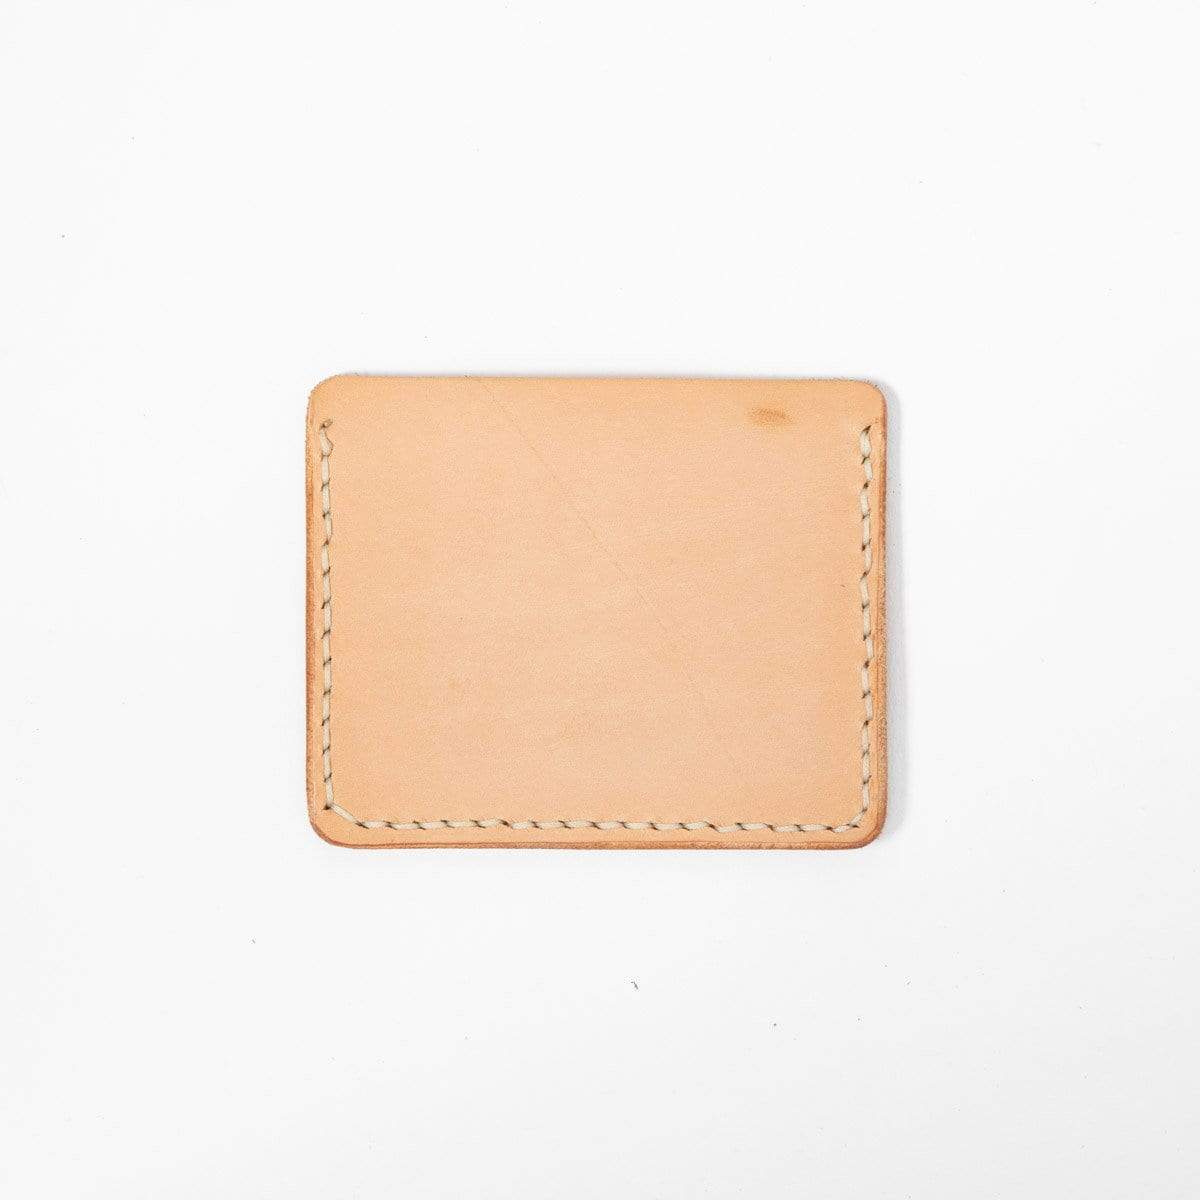 Levi's Brown Trifold Leather Wallet - The Jeans Warehouse